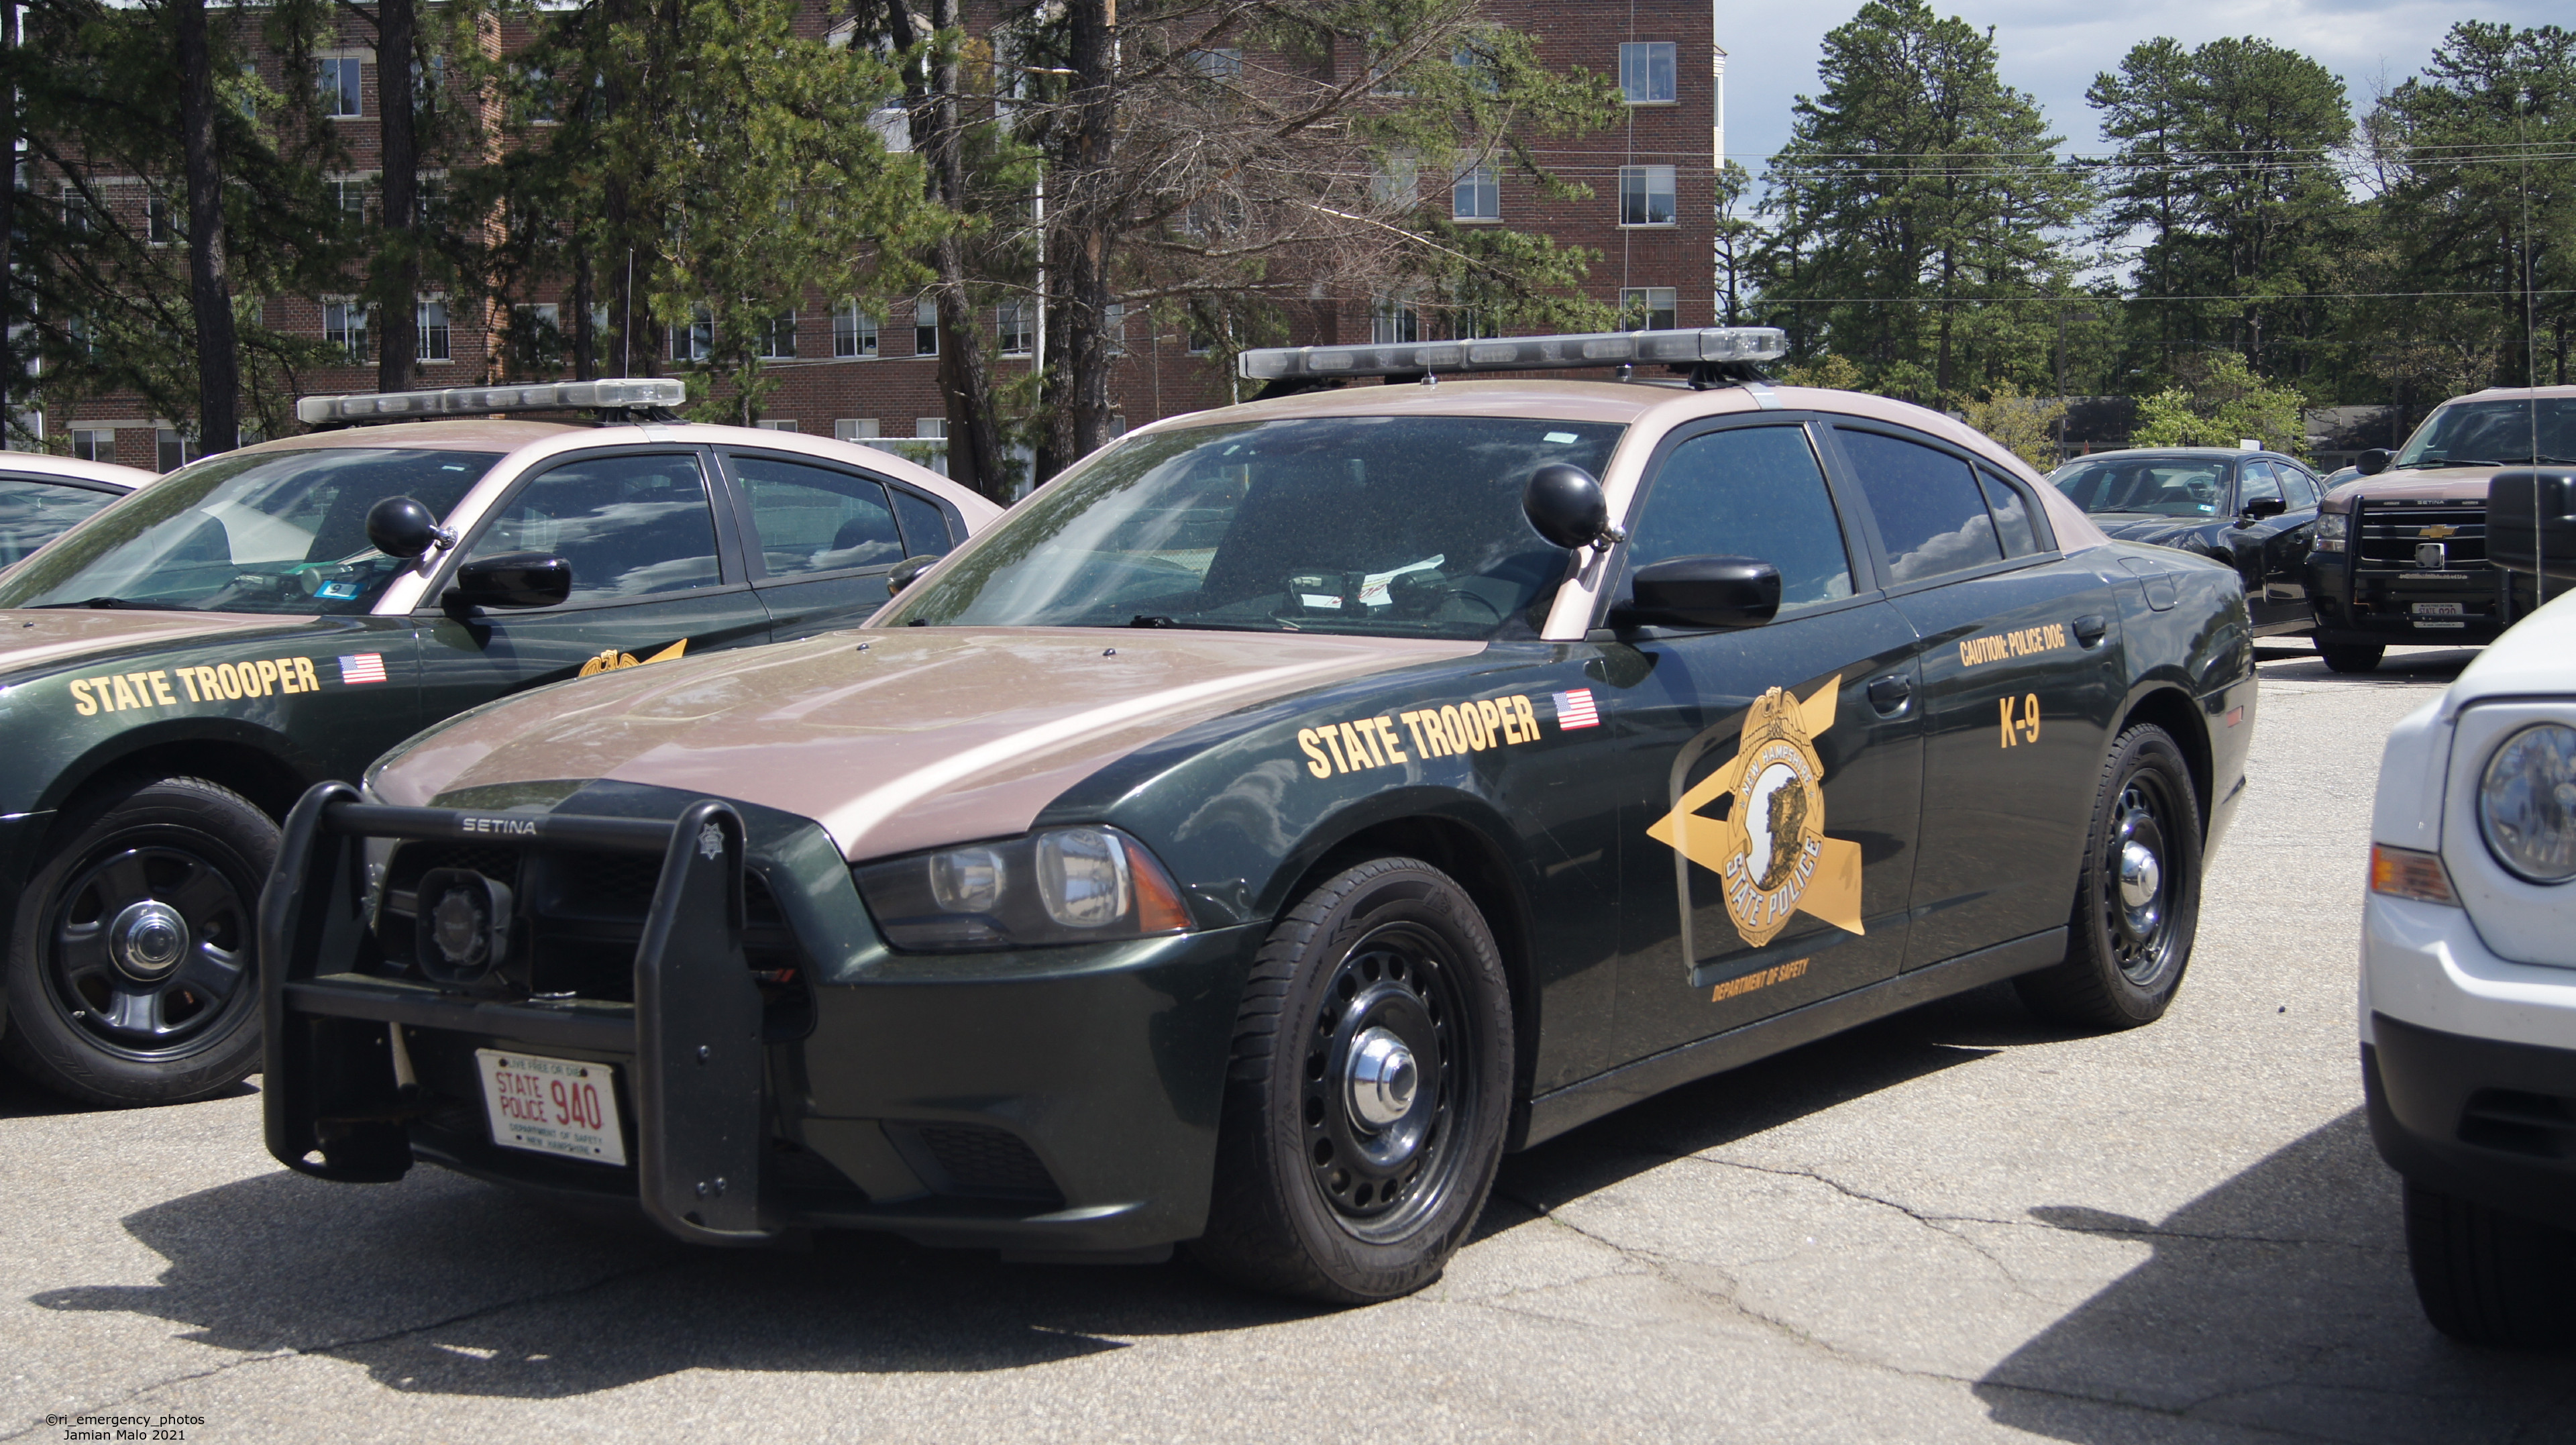 A photo  of New Hampshire State Police
            Cruiser 940, a 2011-2014 Dodge Charger             taken by Jamian Malo